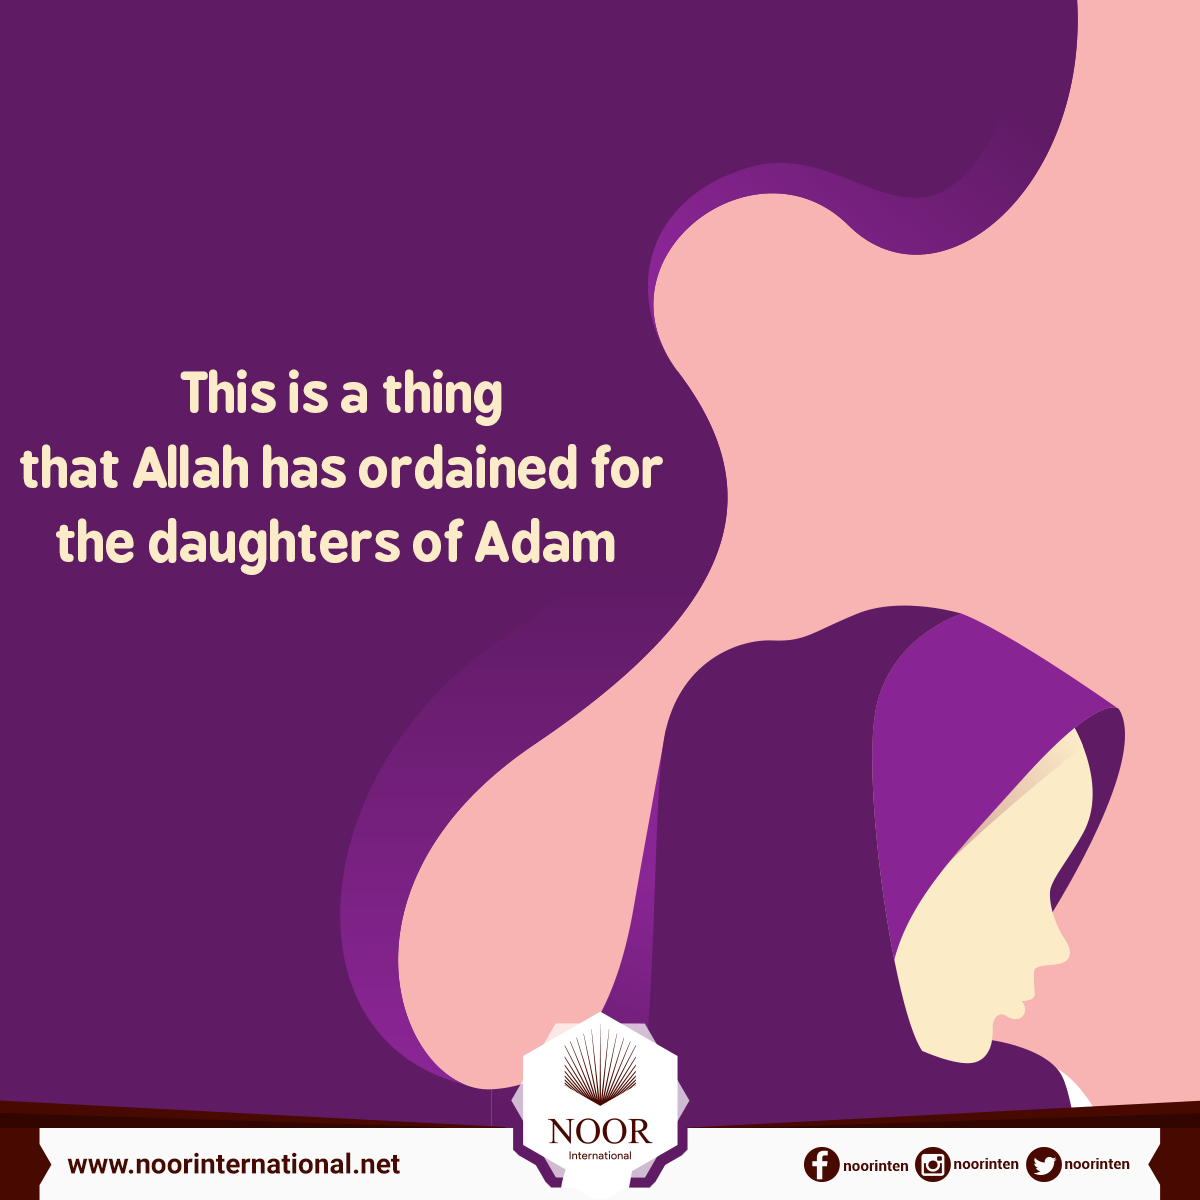 This is a thing that Allah has ordained for the daughters of Adam